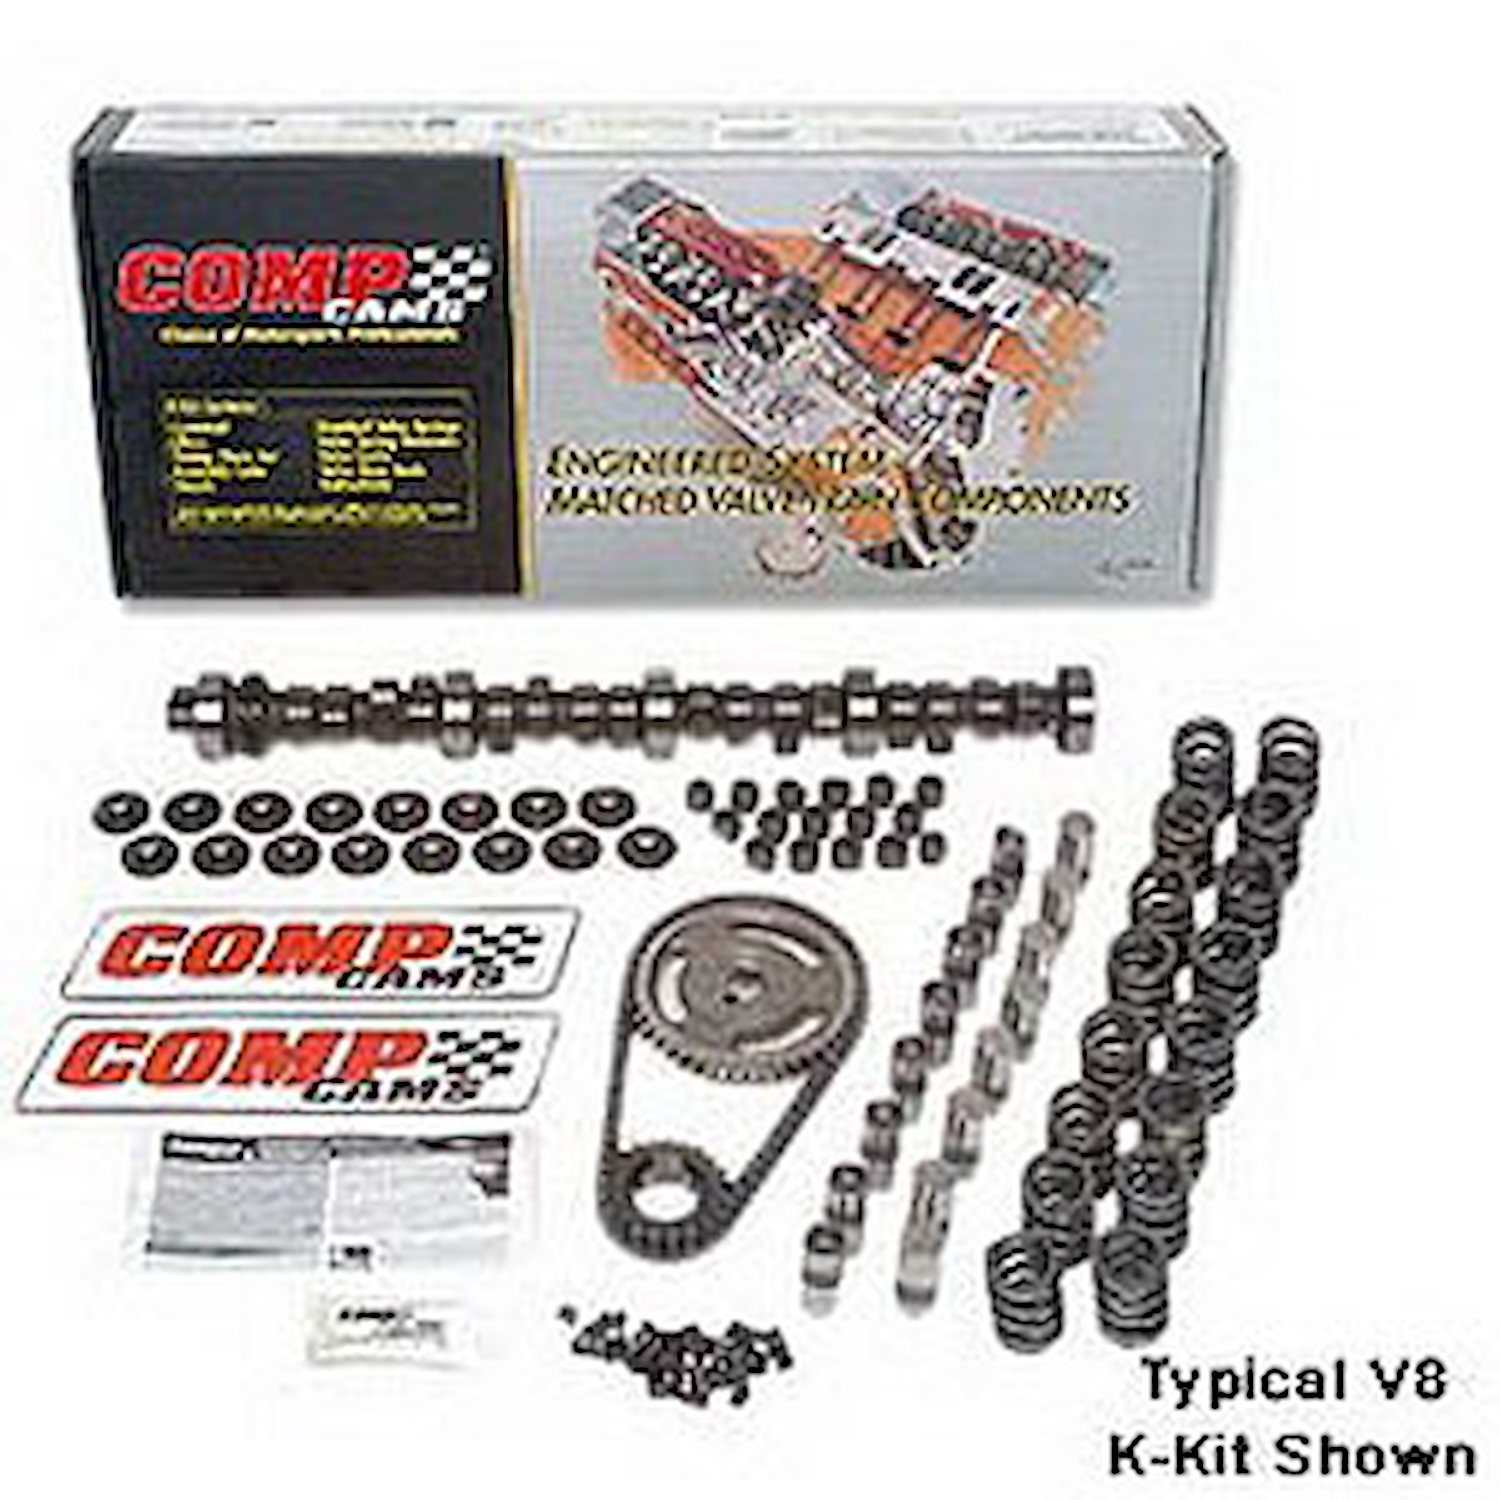 High Energy 260H Hydraulic Flat Tappet Camshaft Complete Kit Lift: .489" /.489" Duration: 260°/260° RPM Range: 1000-5000